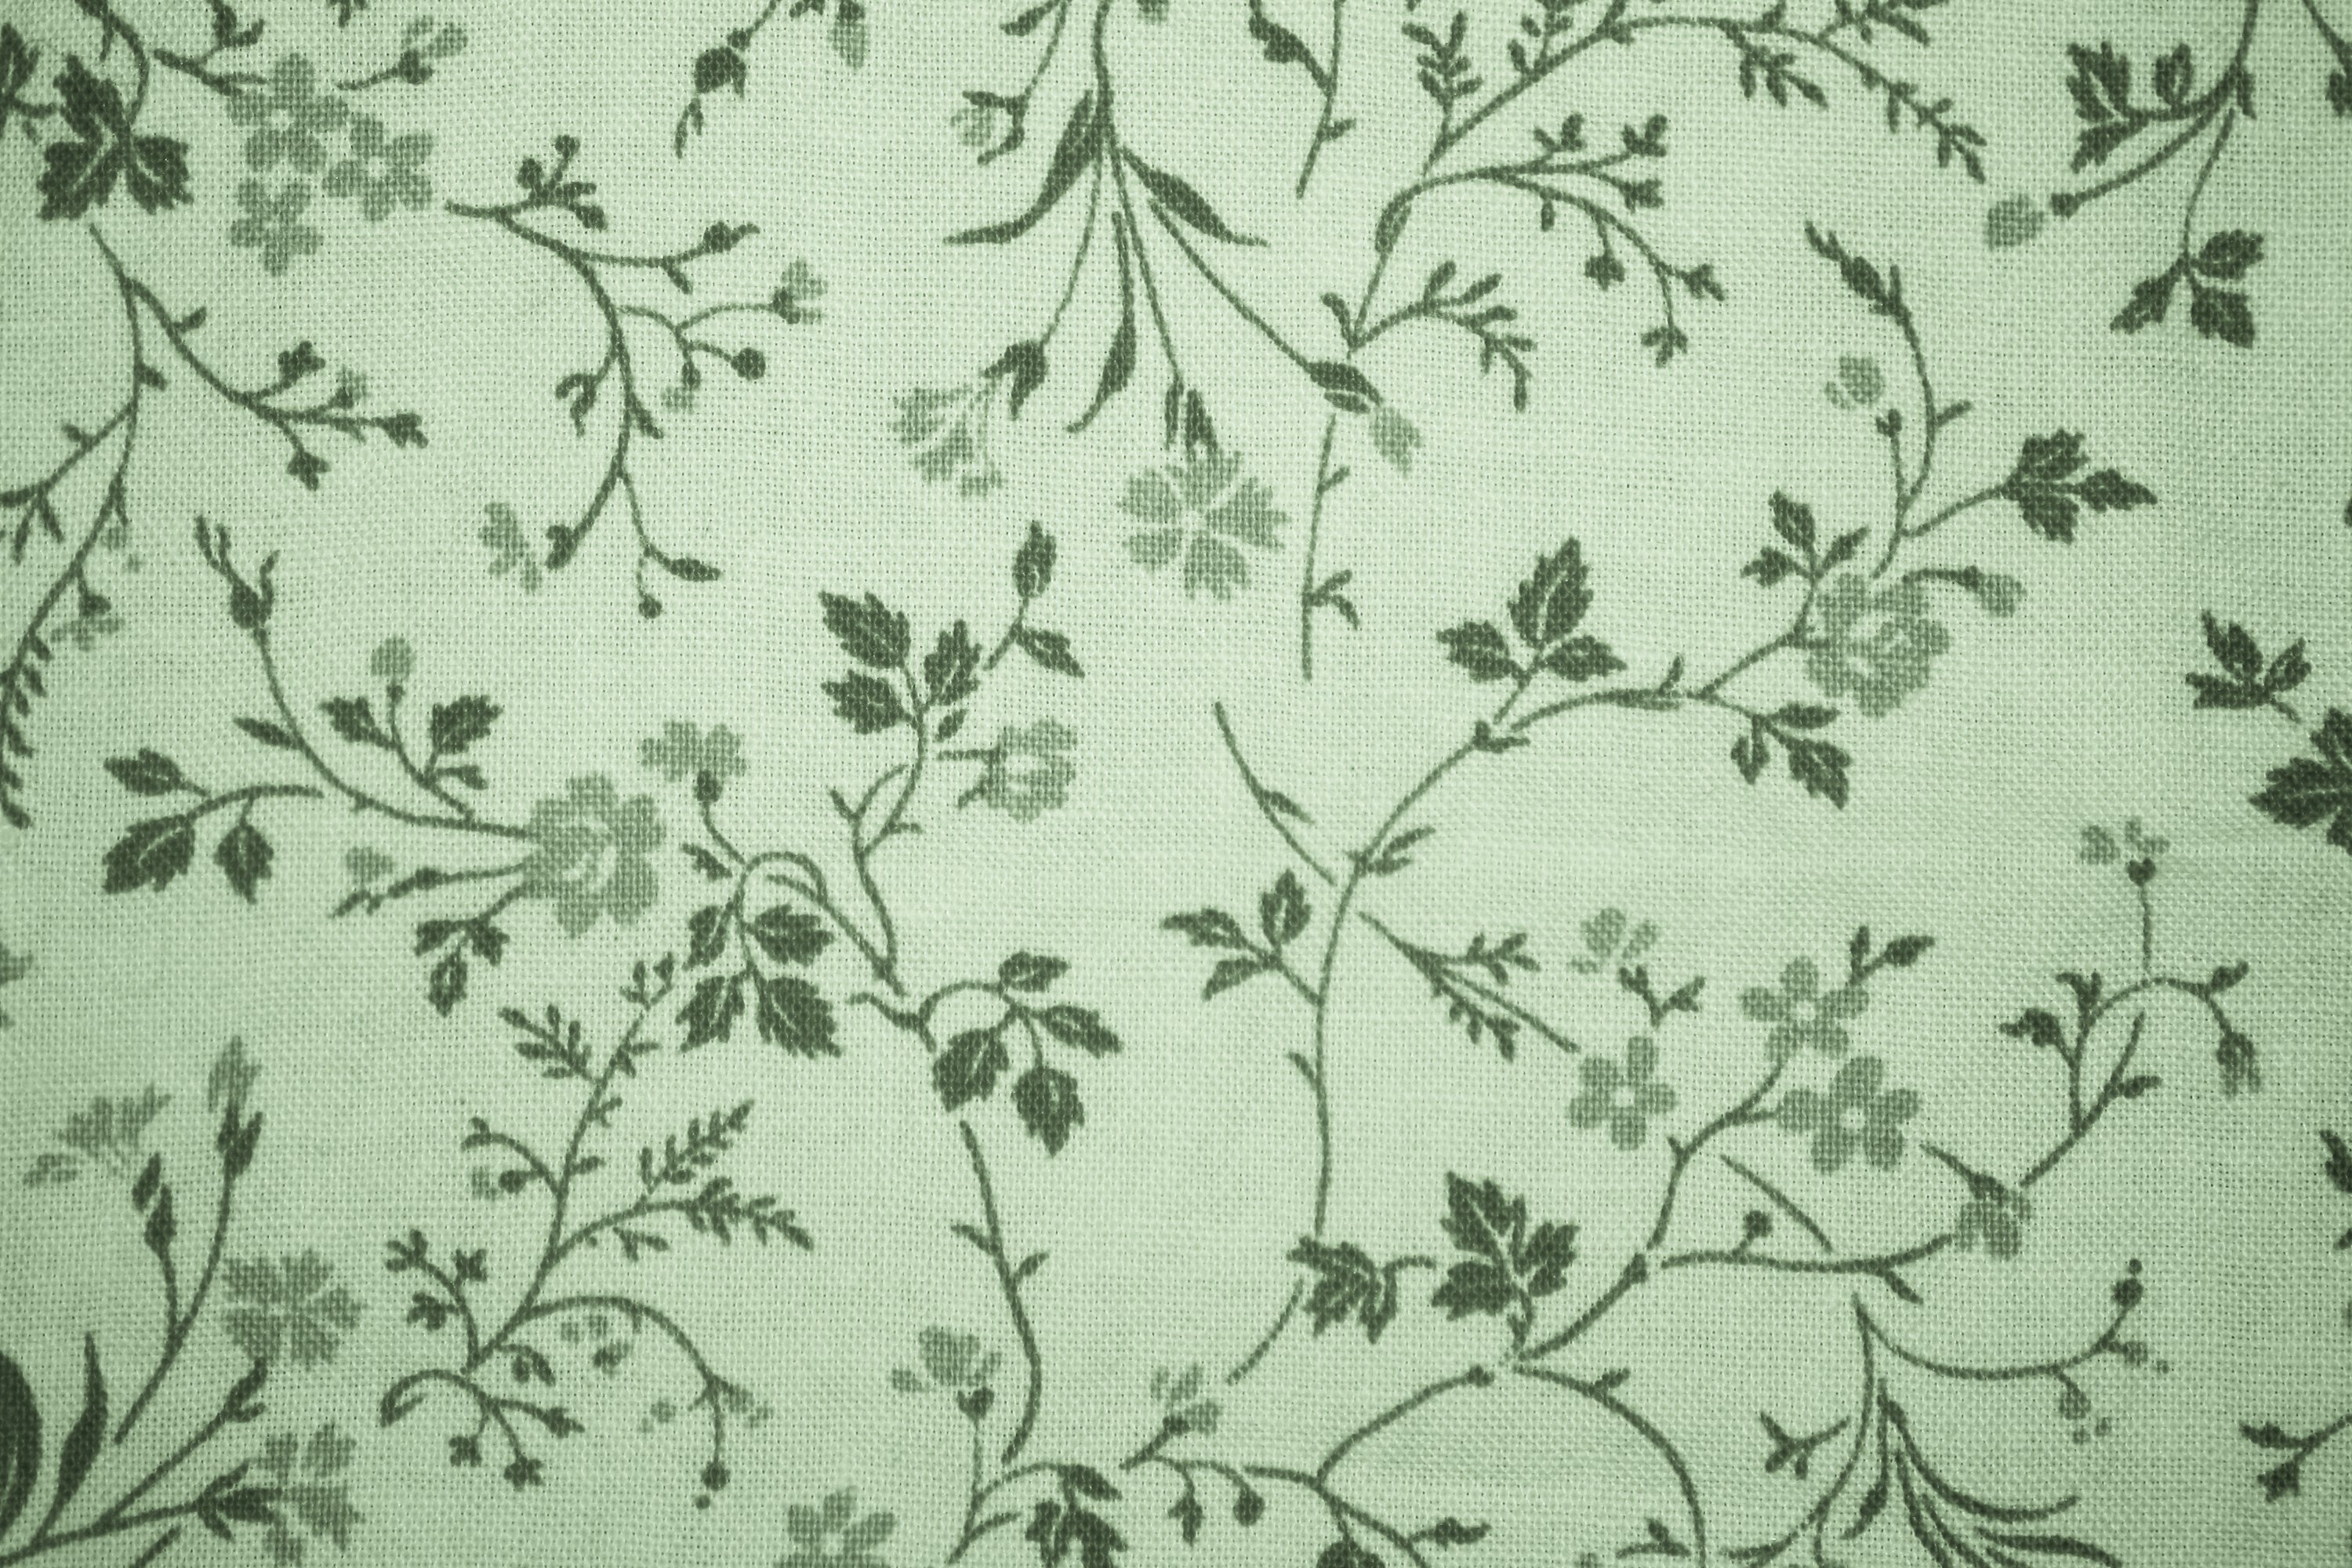 Sage Green Floral Print Fabric Texture   Free High Resolution Photo